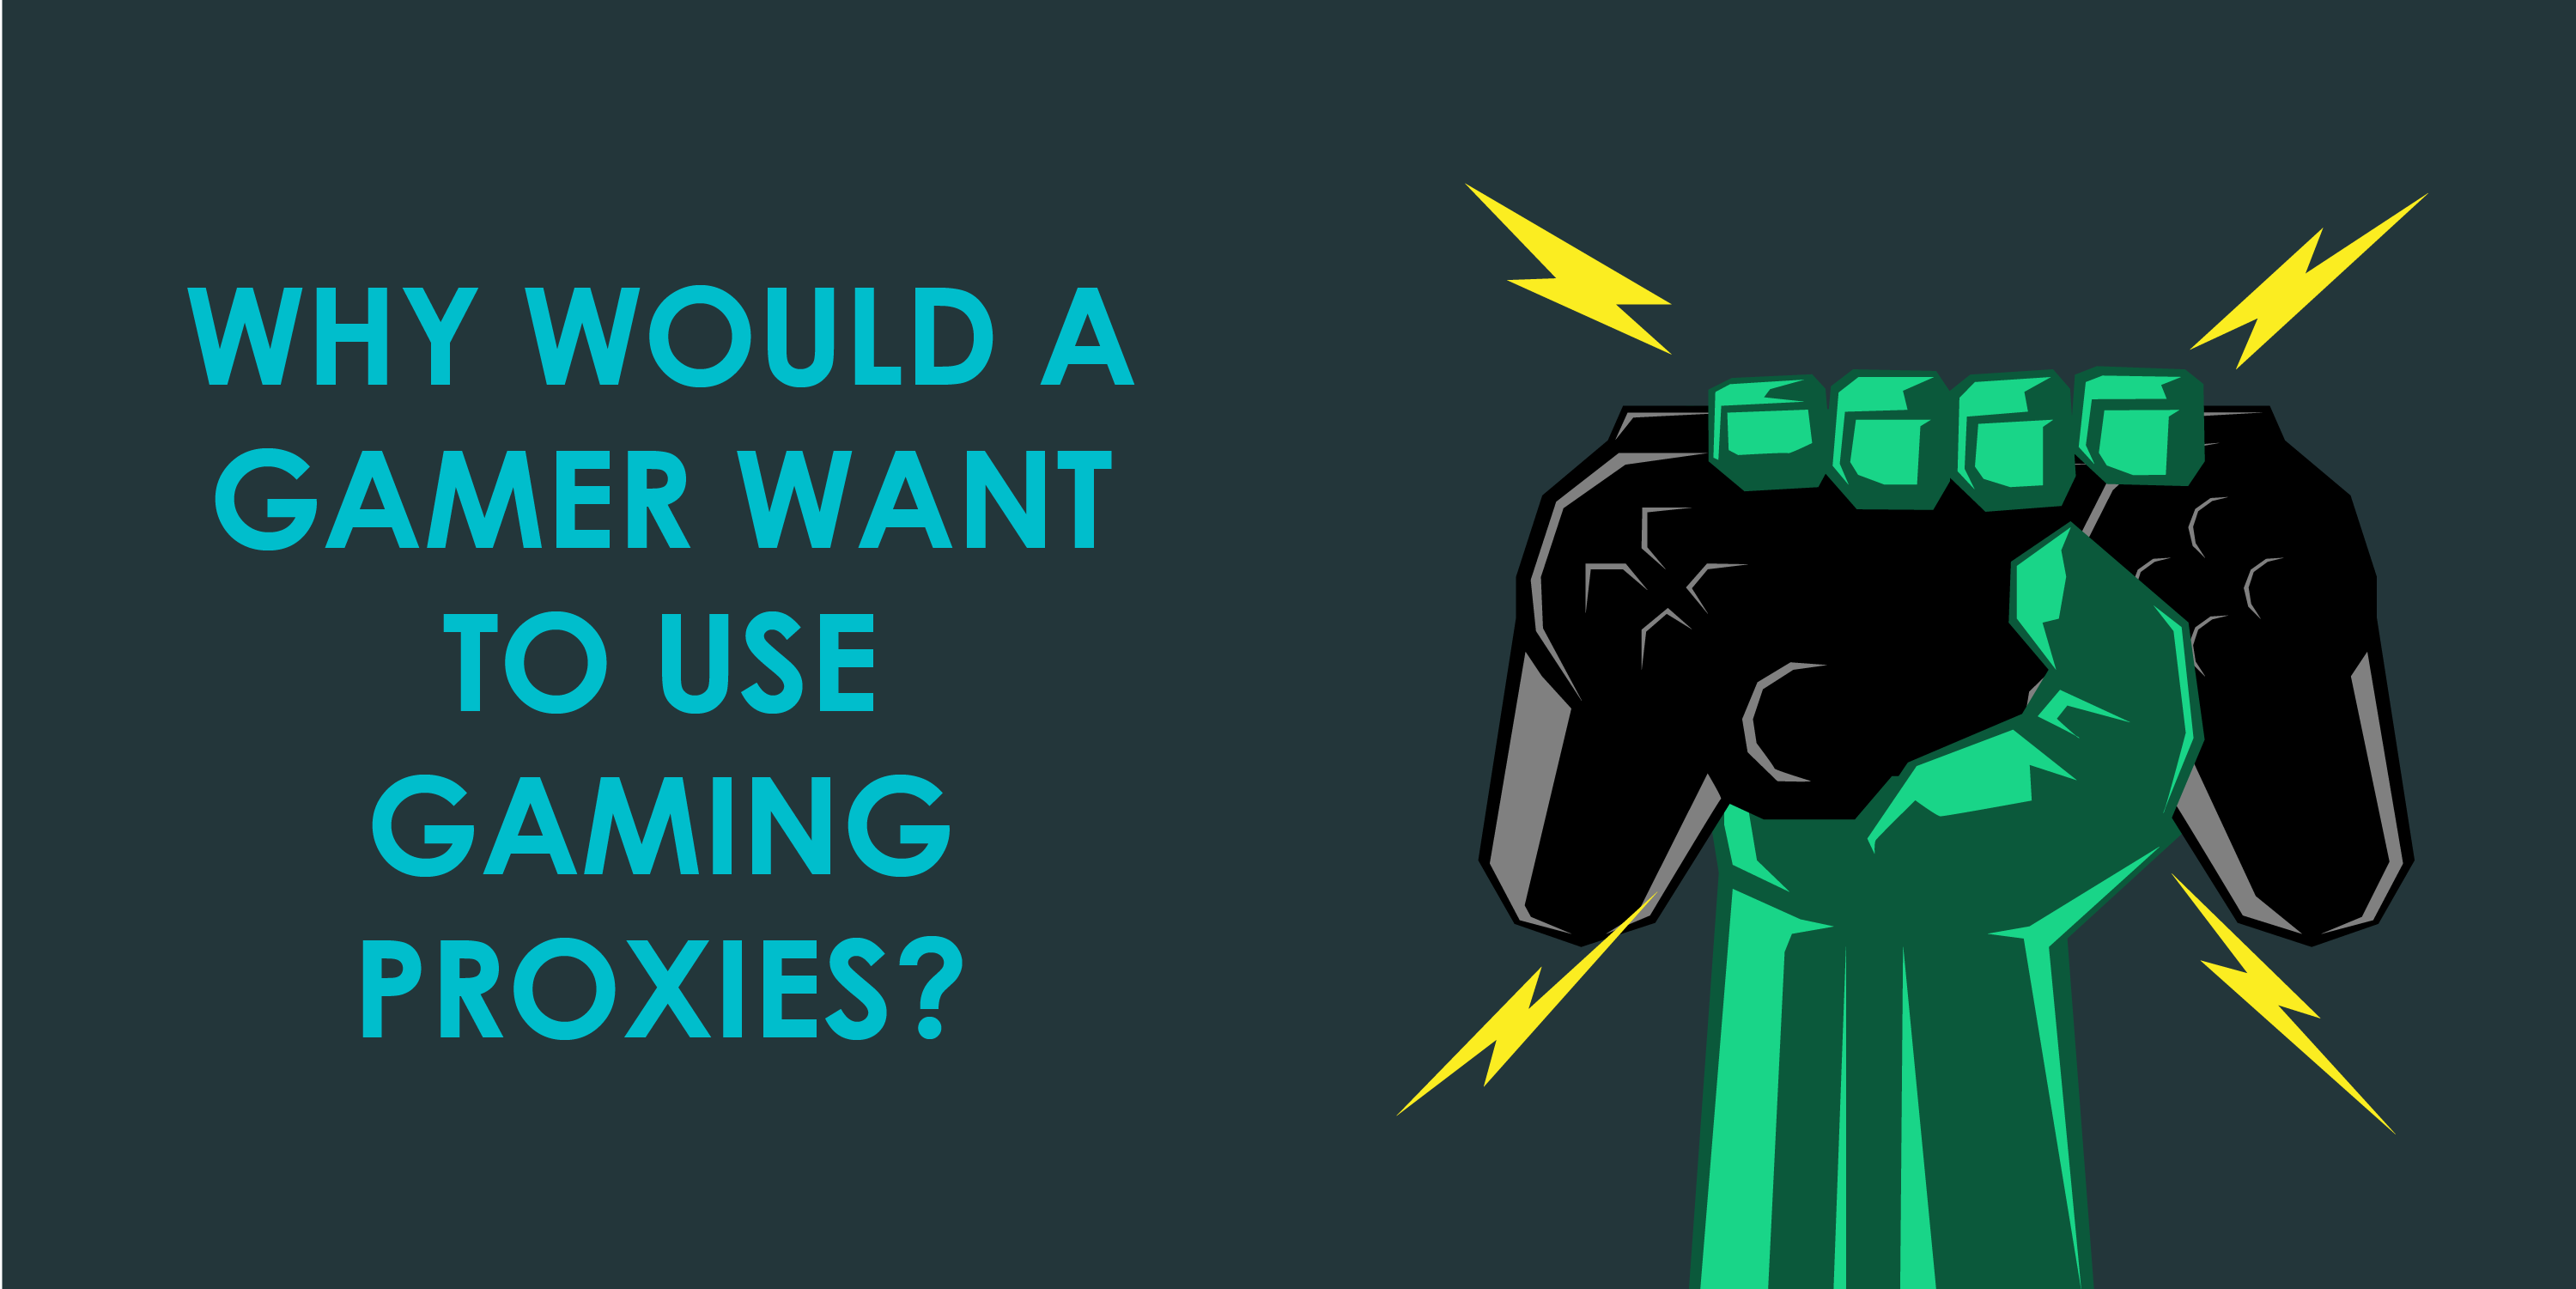 WHY WOULD A GAMER WANT TO USE GAMING PROXIES? 